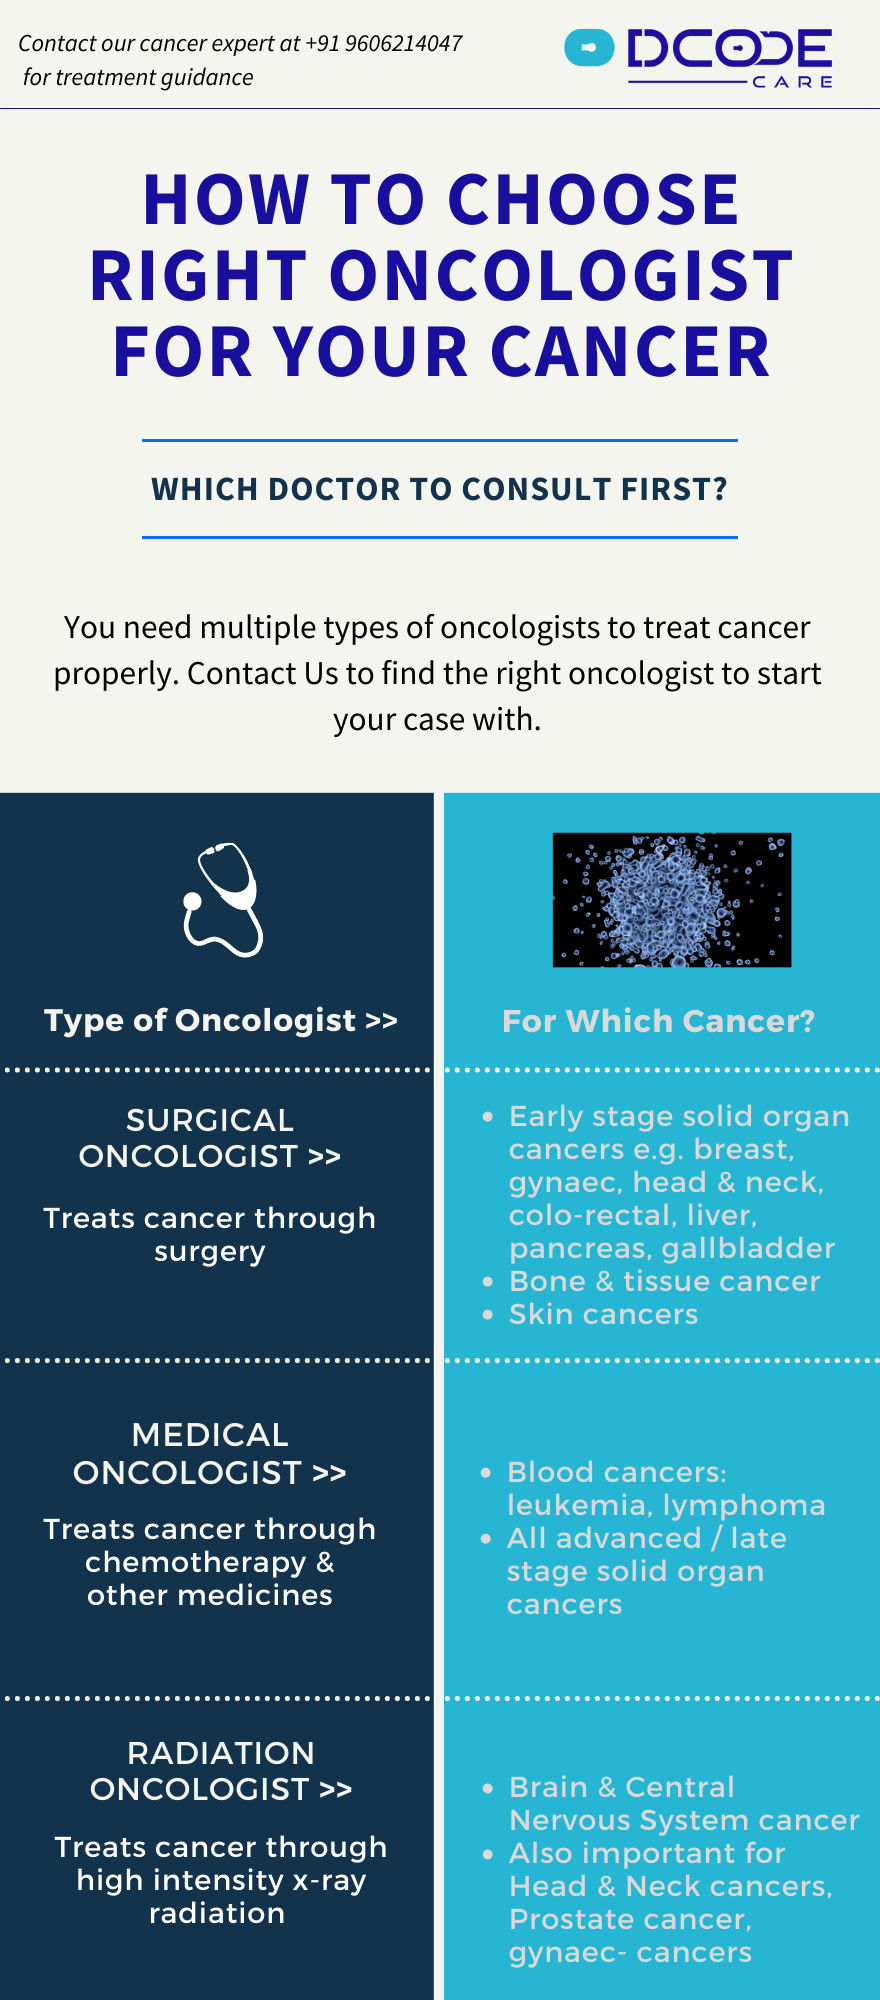 How to choose right oncologist for your cancer